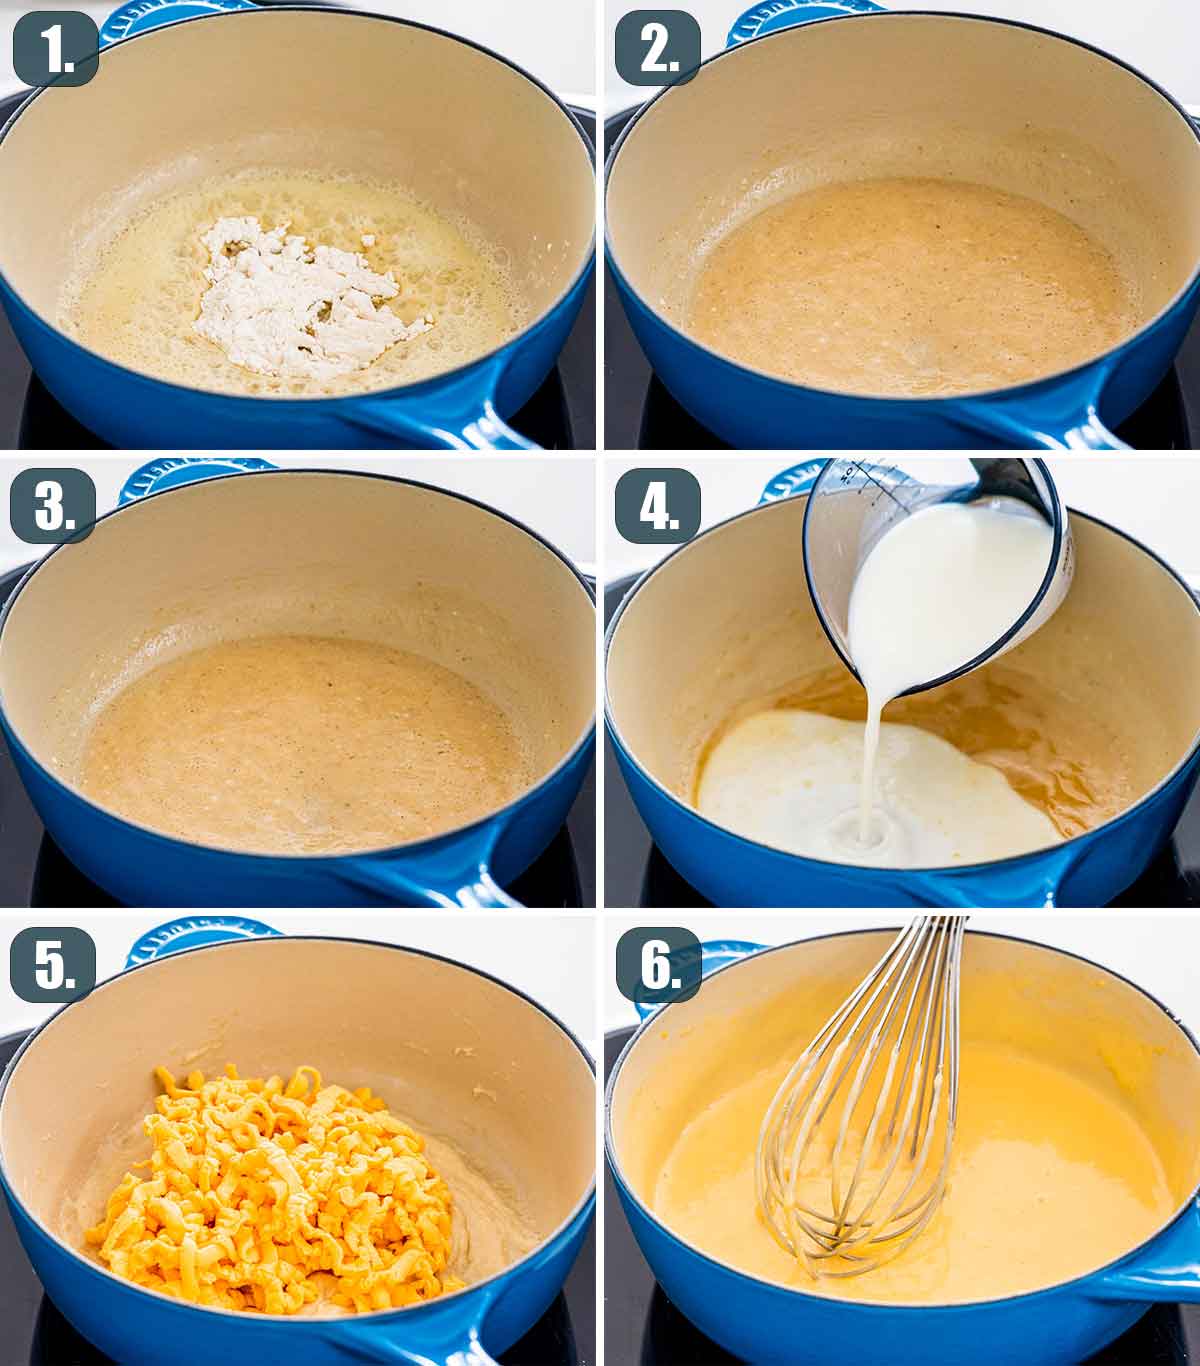 detailed process shots showing how to make nacho cheese sauce.